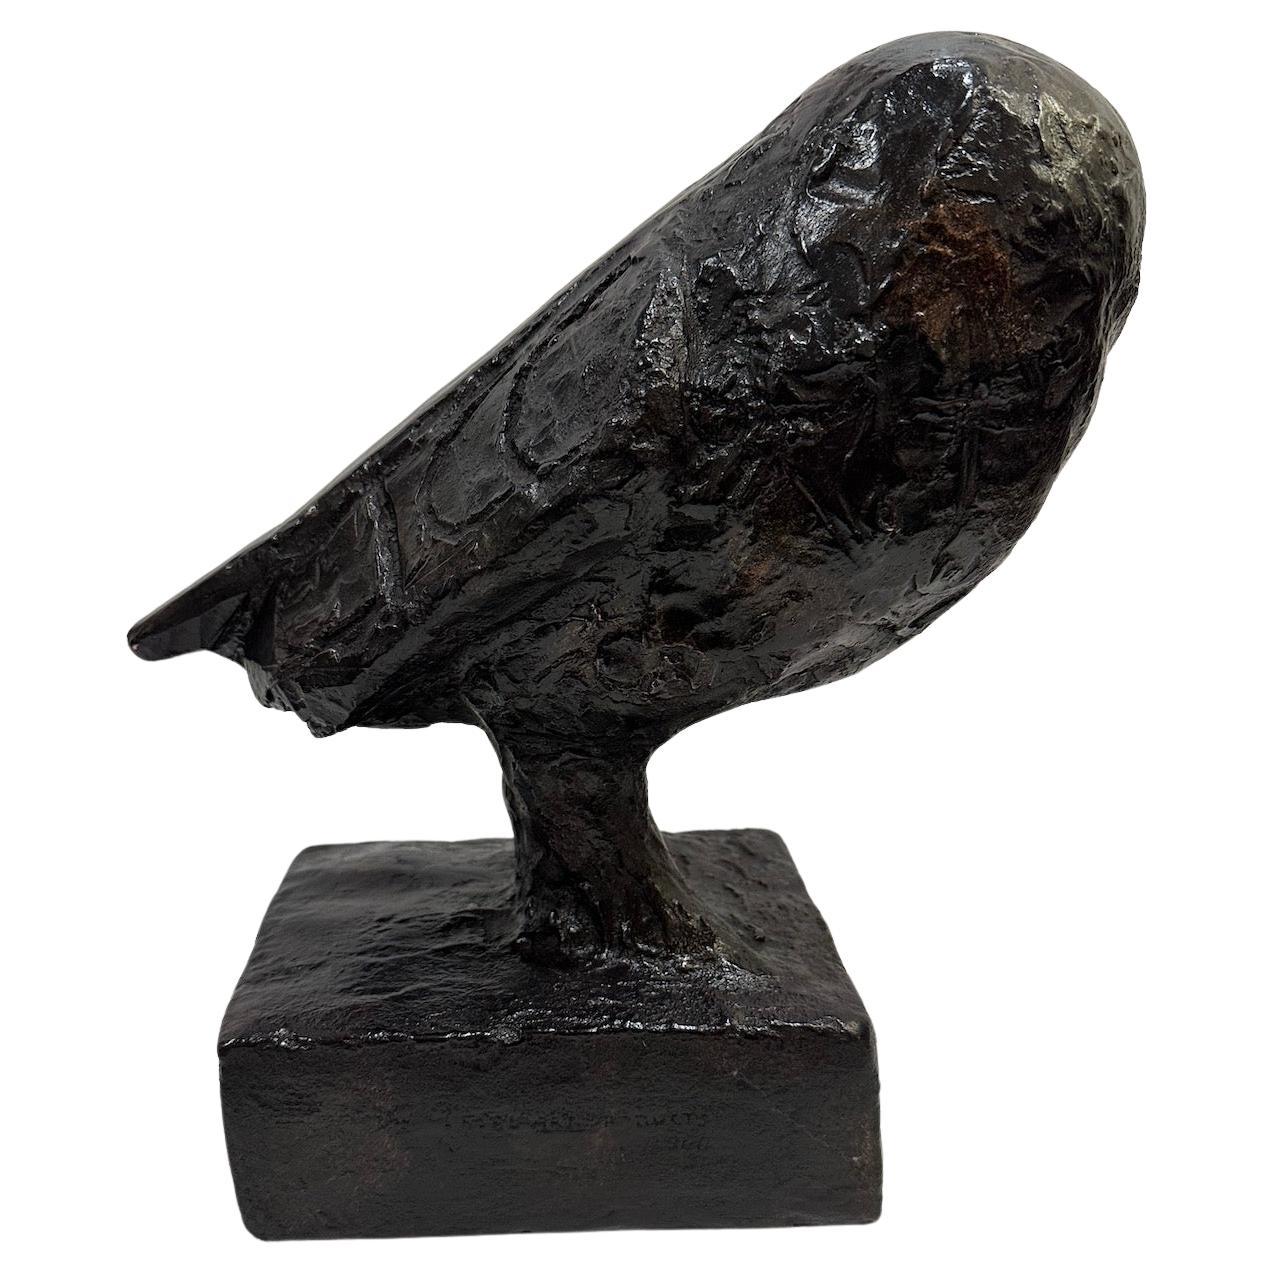 A charming, cast resin owl sculpture in the style of Picasso.  
